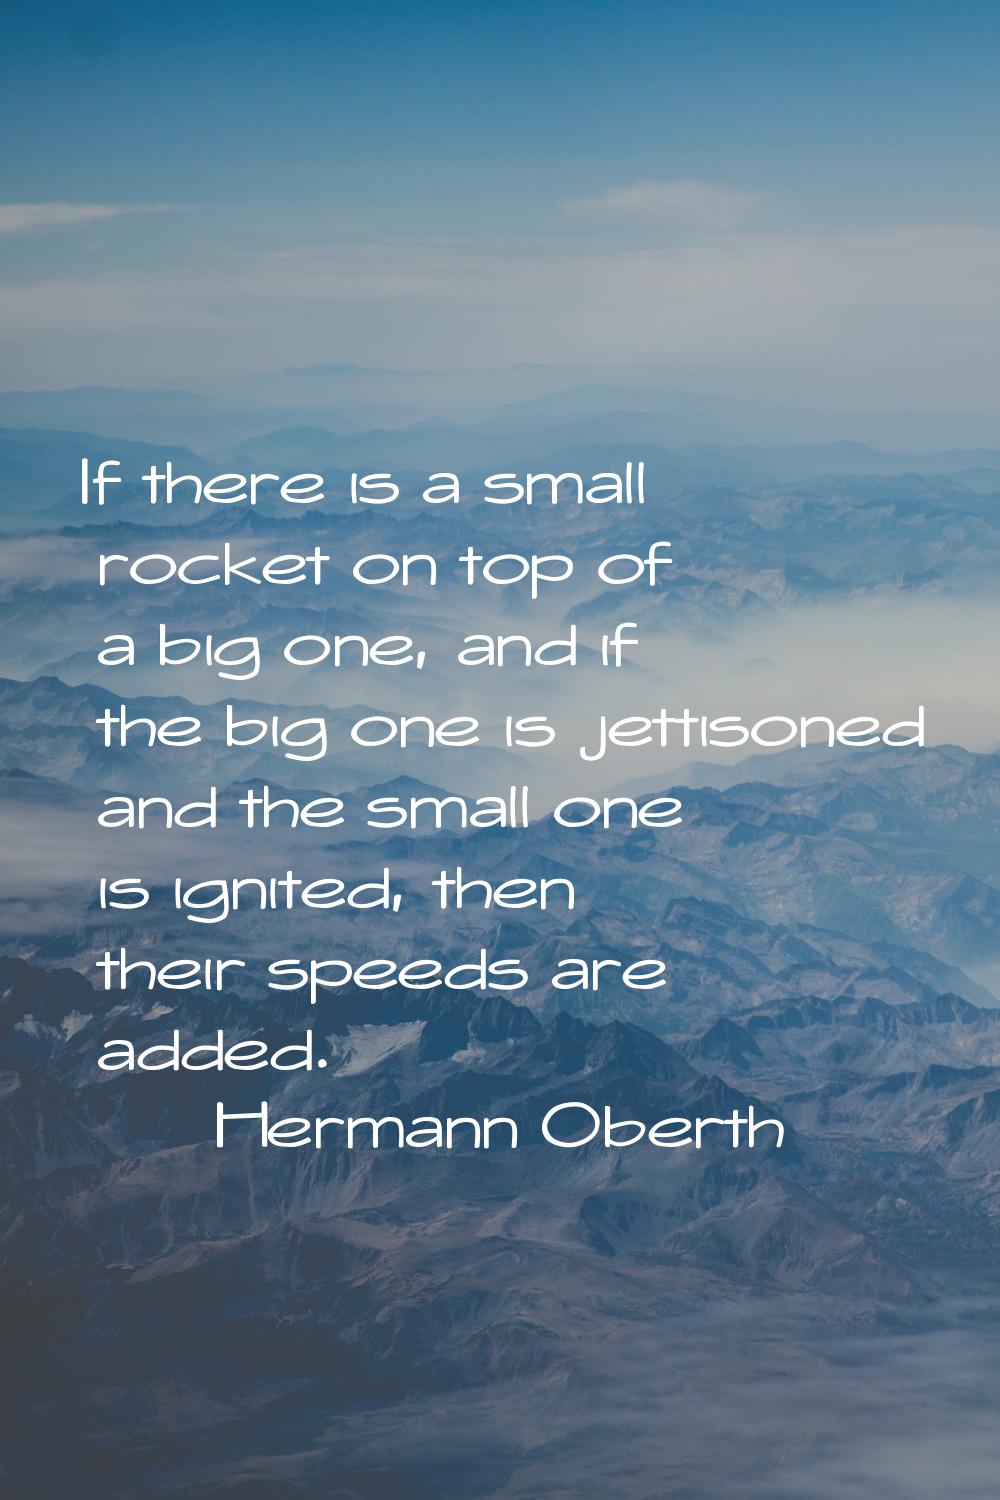 If there is a small rocket on top of a big one, and if the big one is jettisoned and the small one 